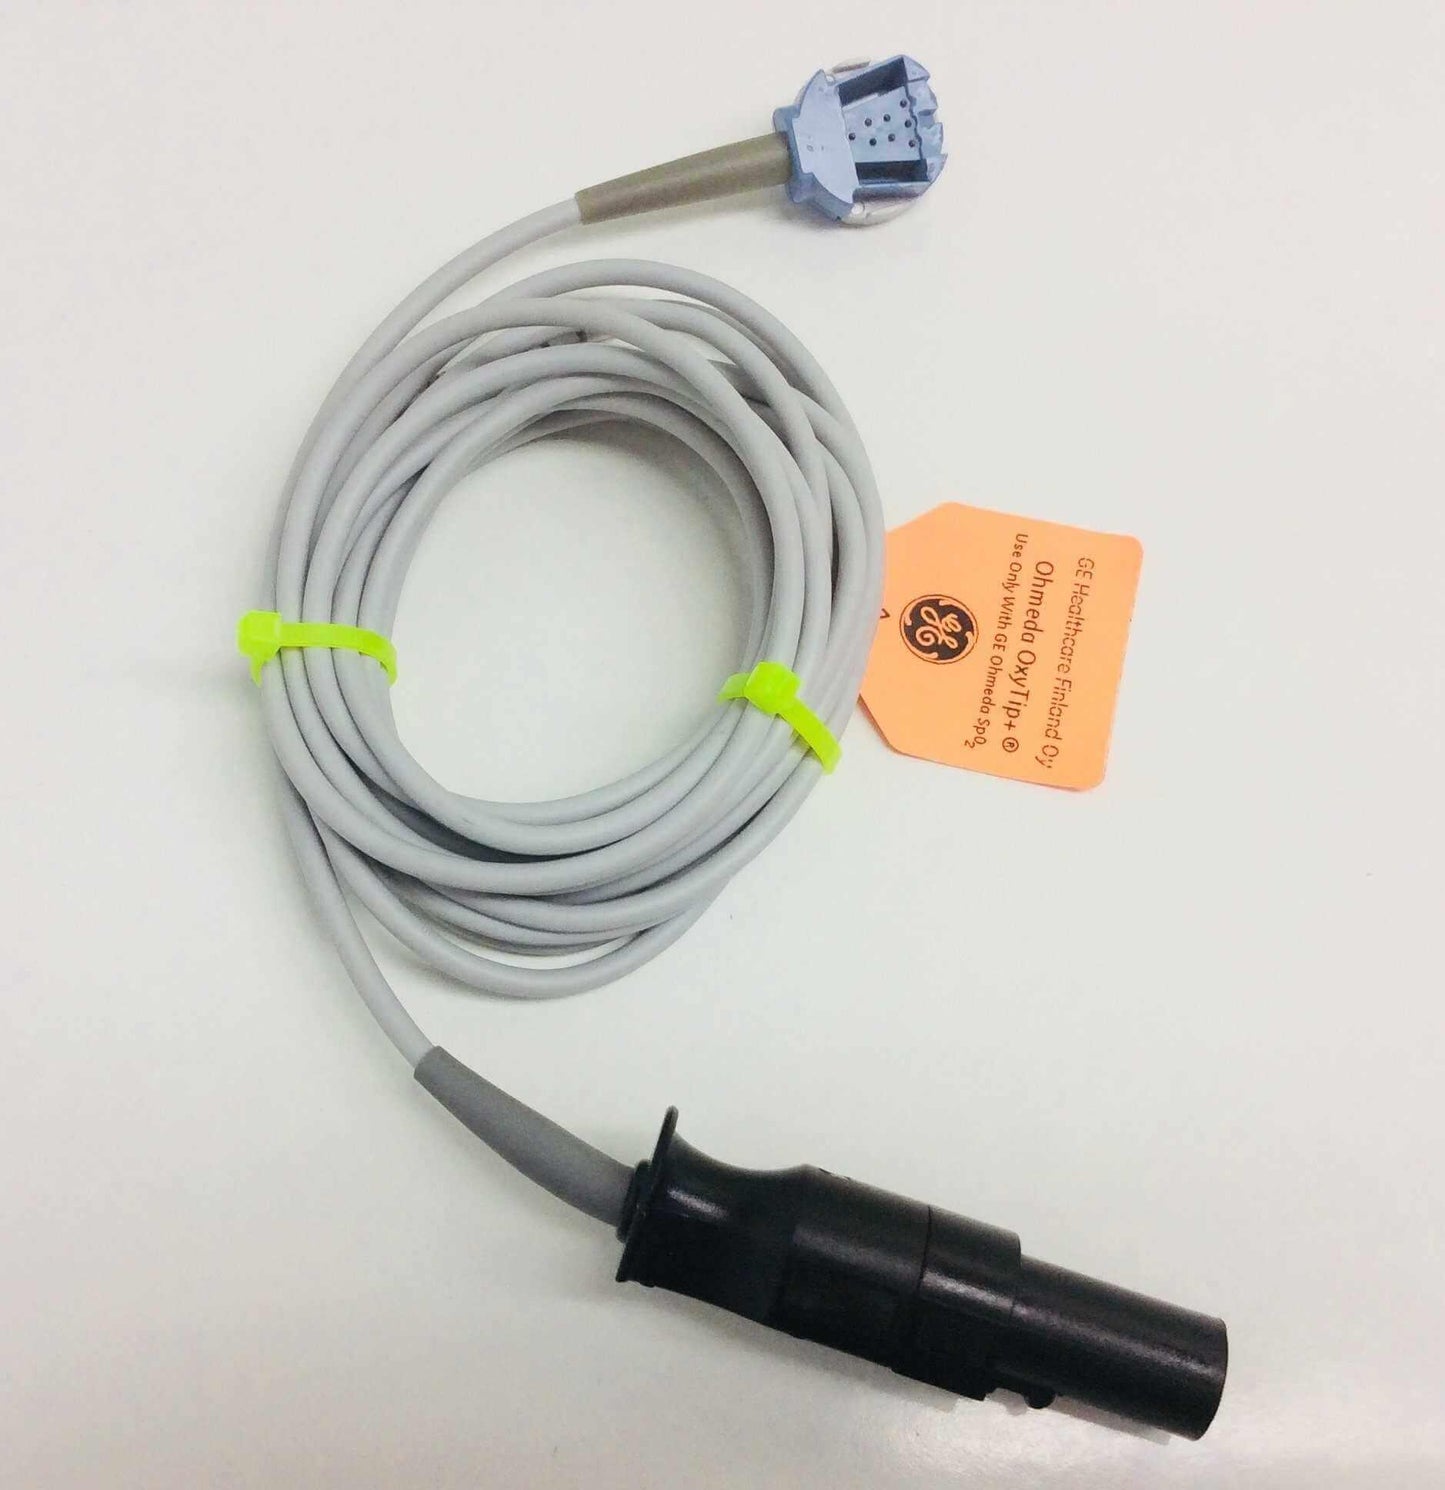 USED Datex Ohmeda Compatible SpO2 Adapter Cable OXY-OL3 Warranty FREE Shipping - MBR Medicals